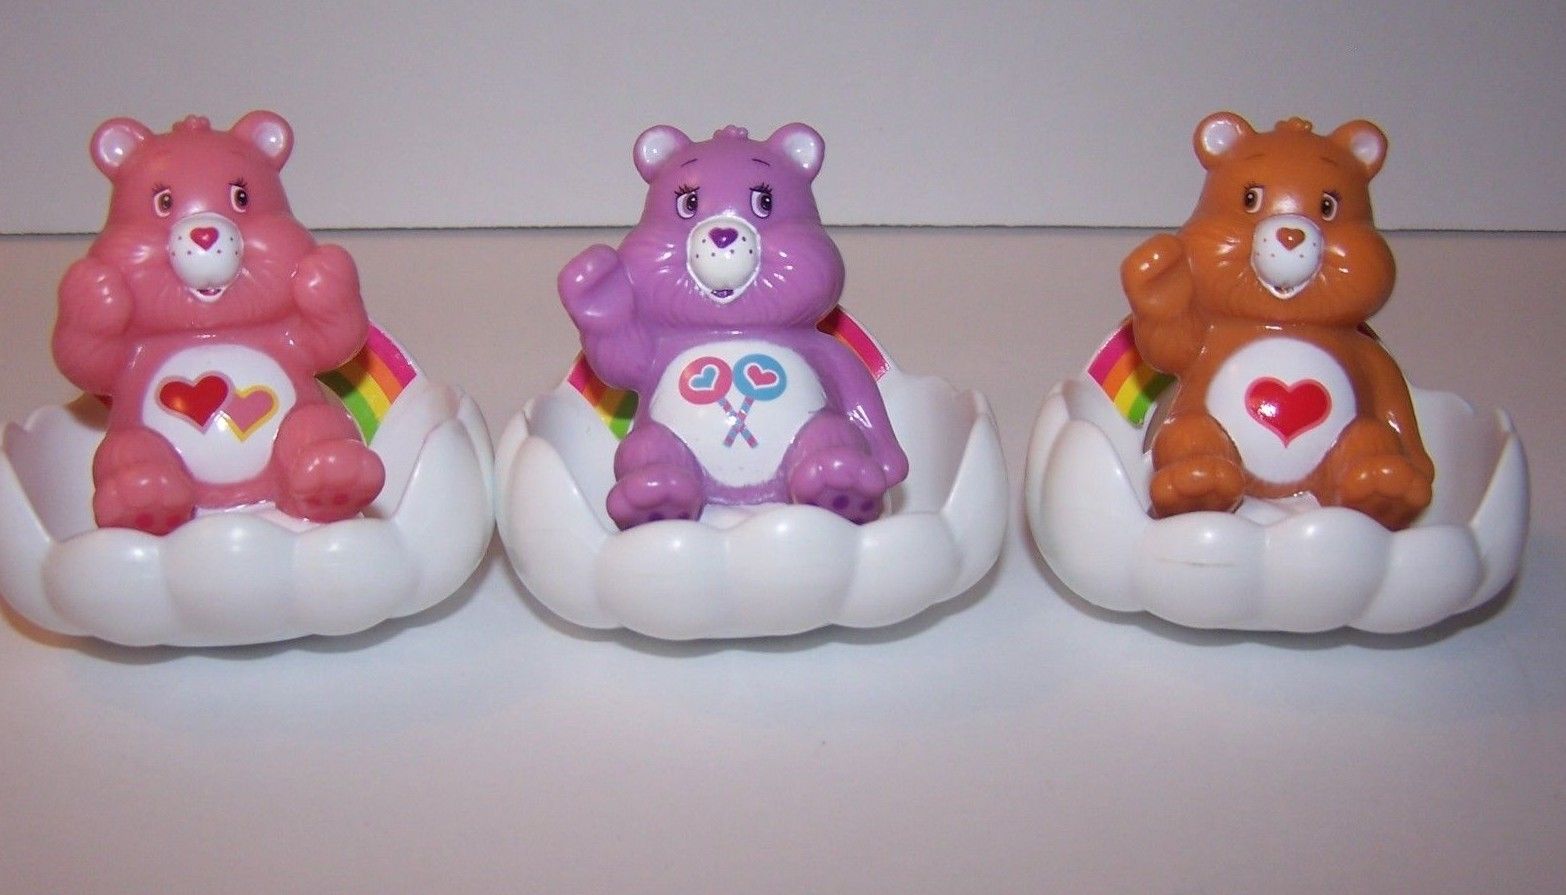 Care-a-Lot Ferris Wheel 3 Replacement clouds and 3 Care Bears toys